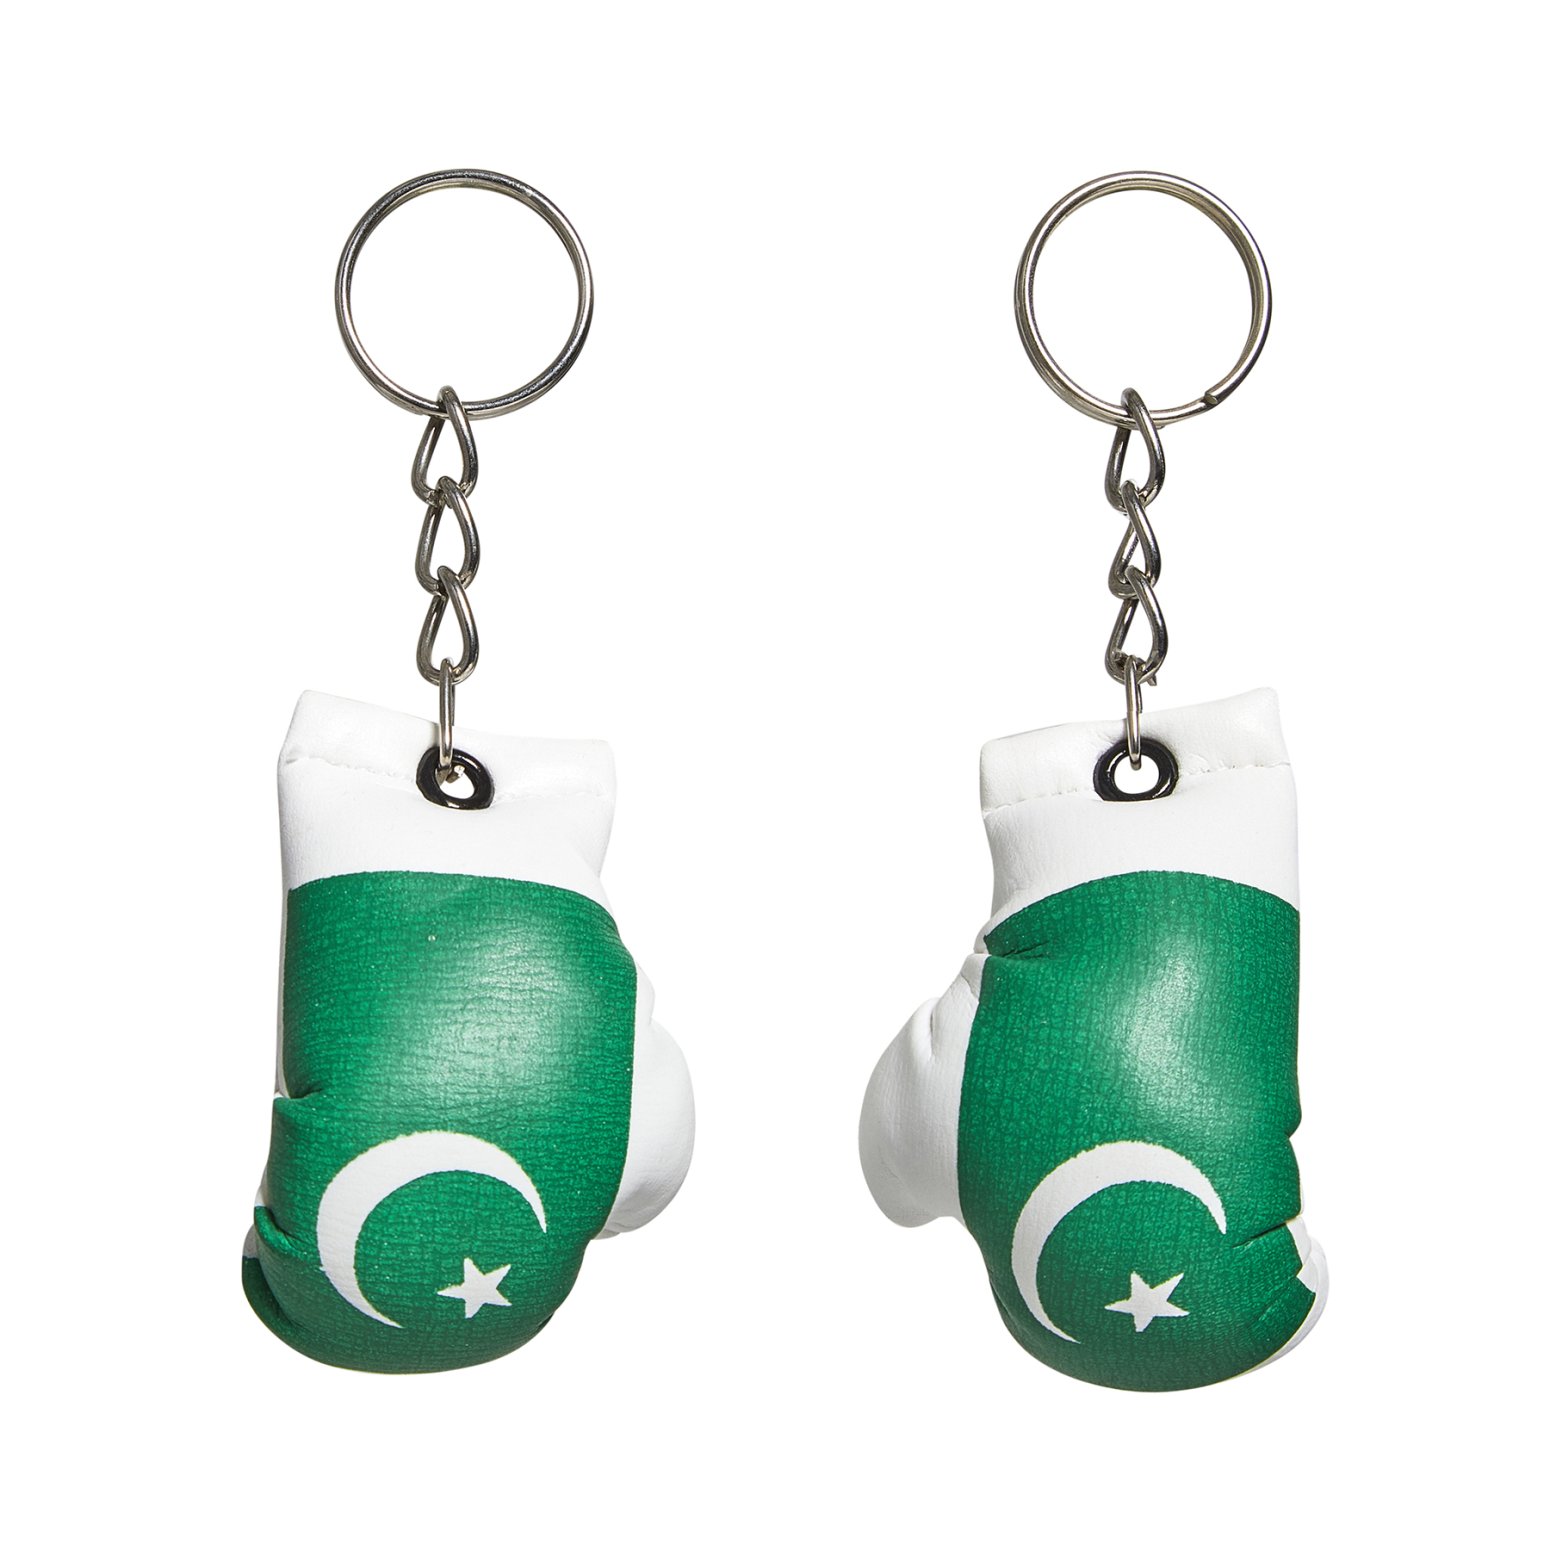 Country Flag Keyrings - Pakistan - Click Image to Close